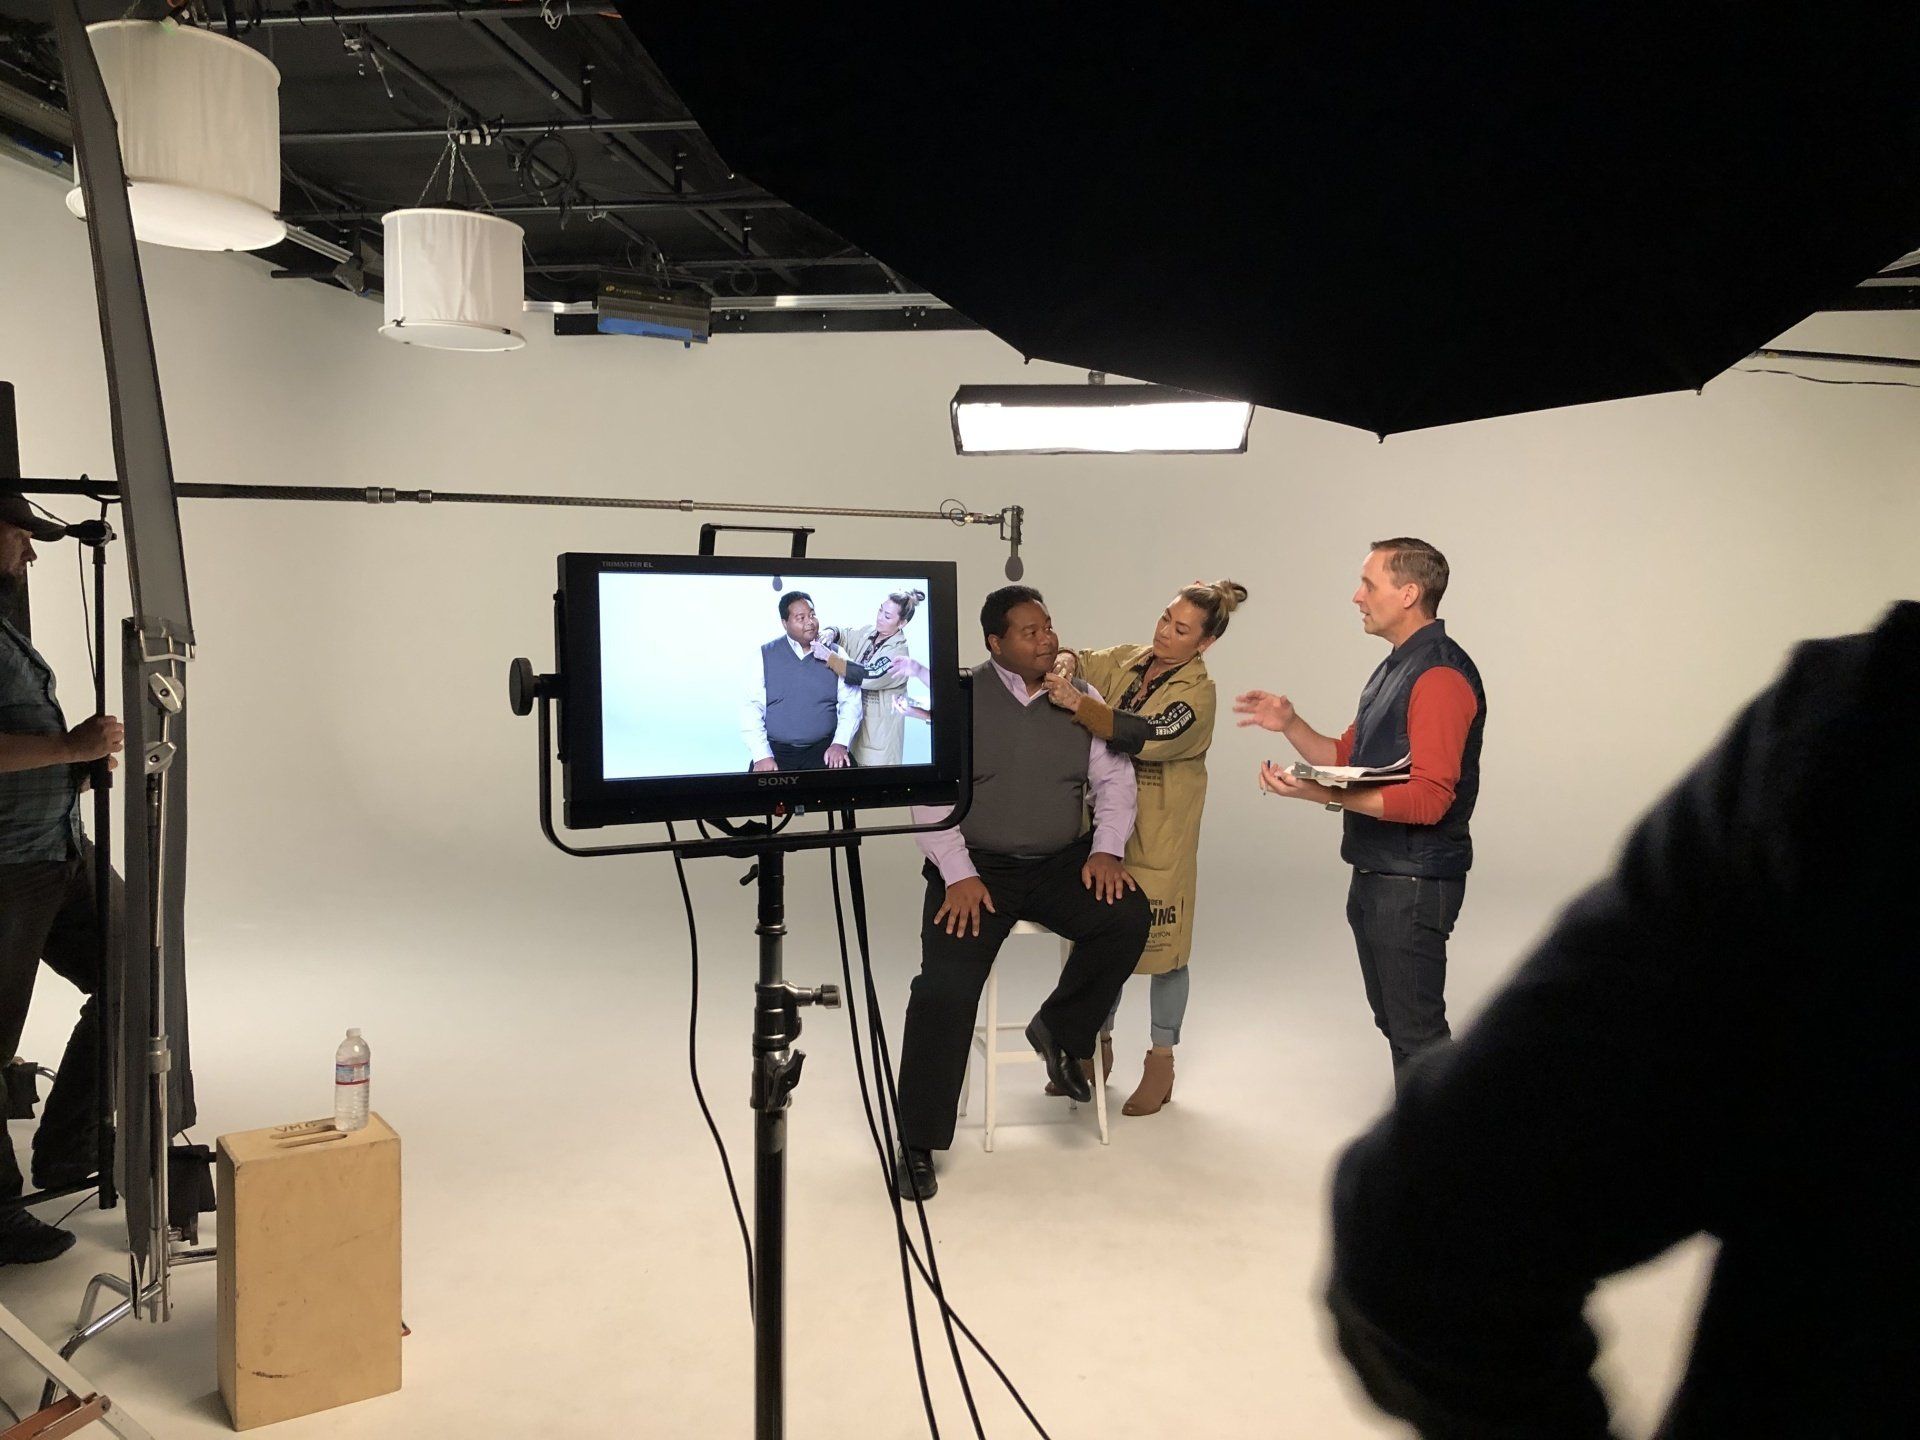 Spin Creative director Matthew Billings on set at a studio in Seattle for a brand video marketing project, part of a new brand launch for the client.